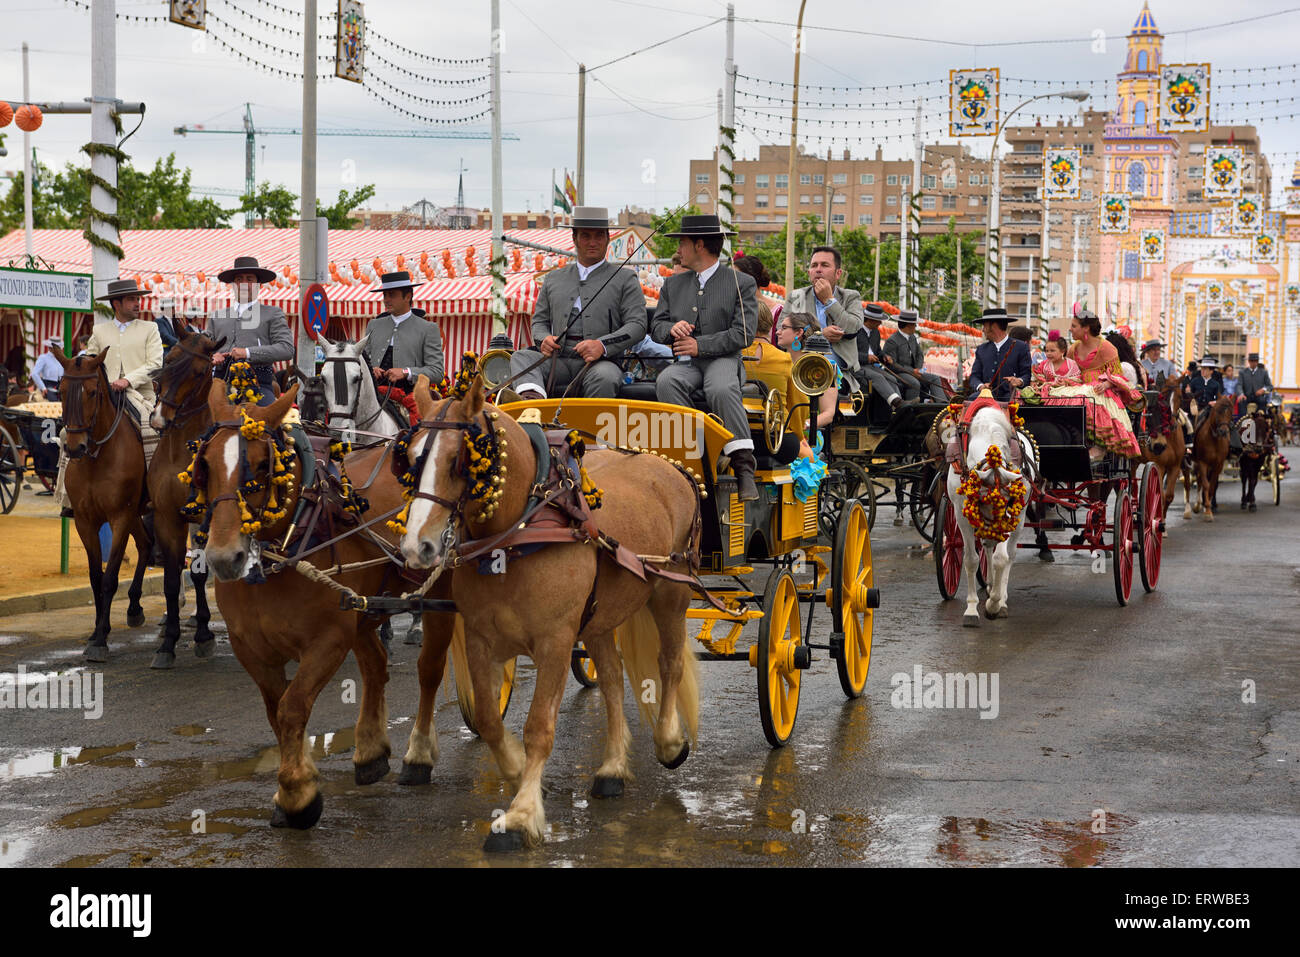 Line of horse drawn carriages with families and riders at the Main Gate 2015 Seville April Fair Stock Photo